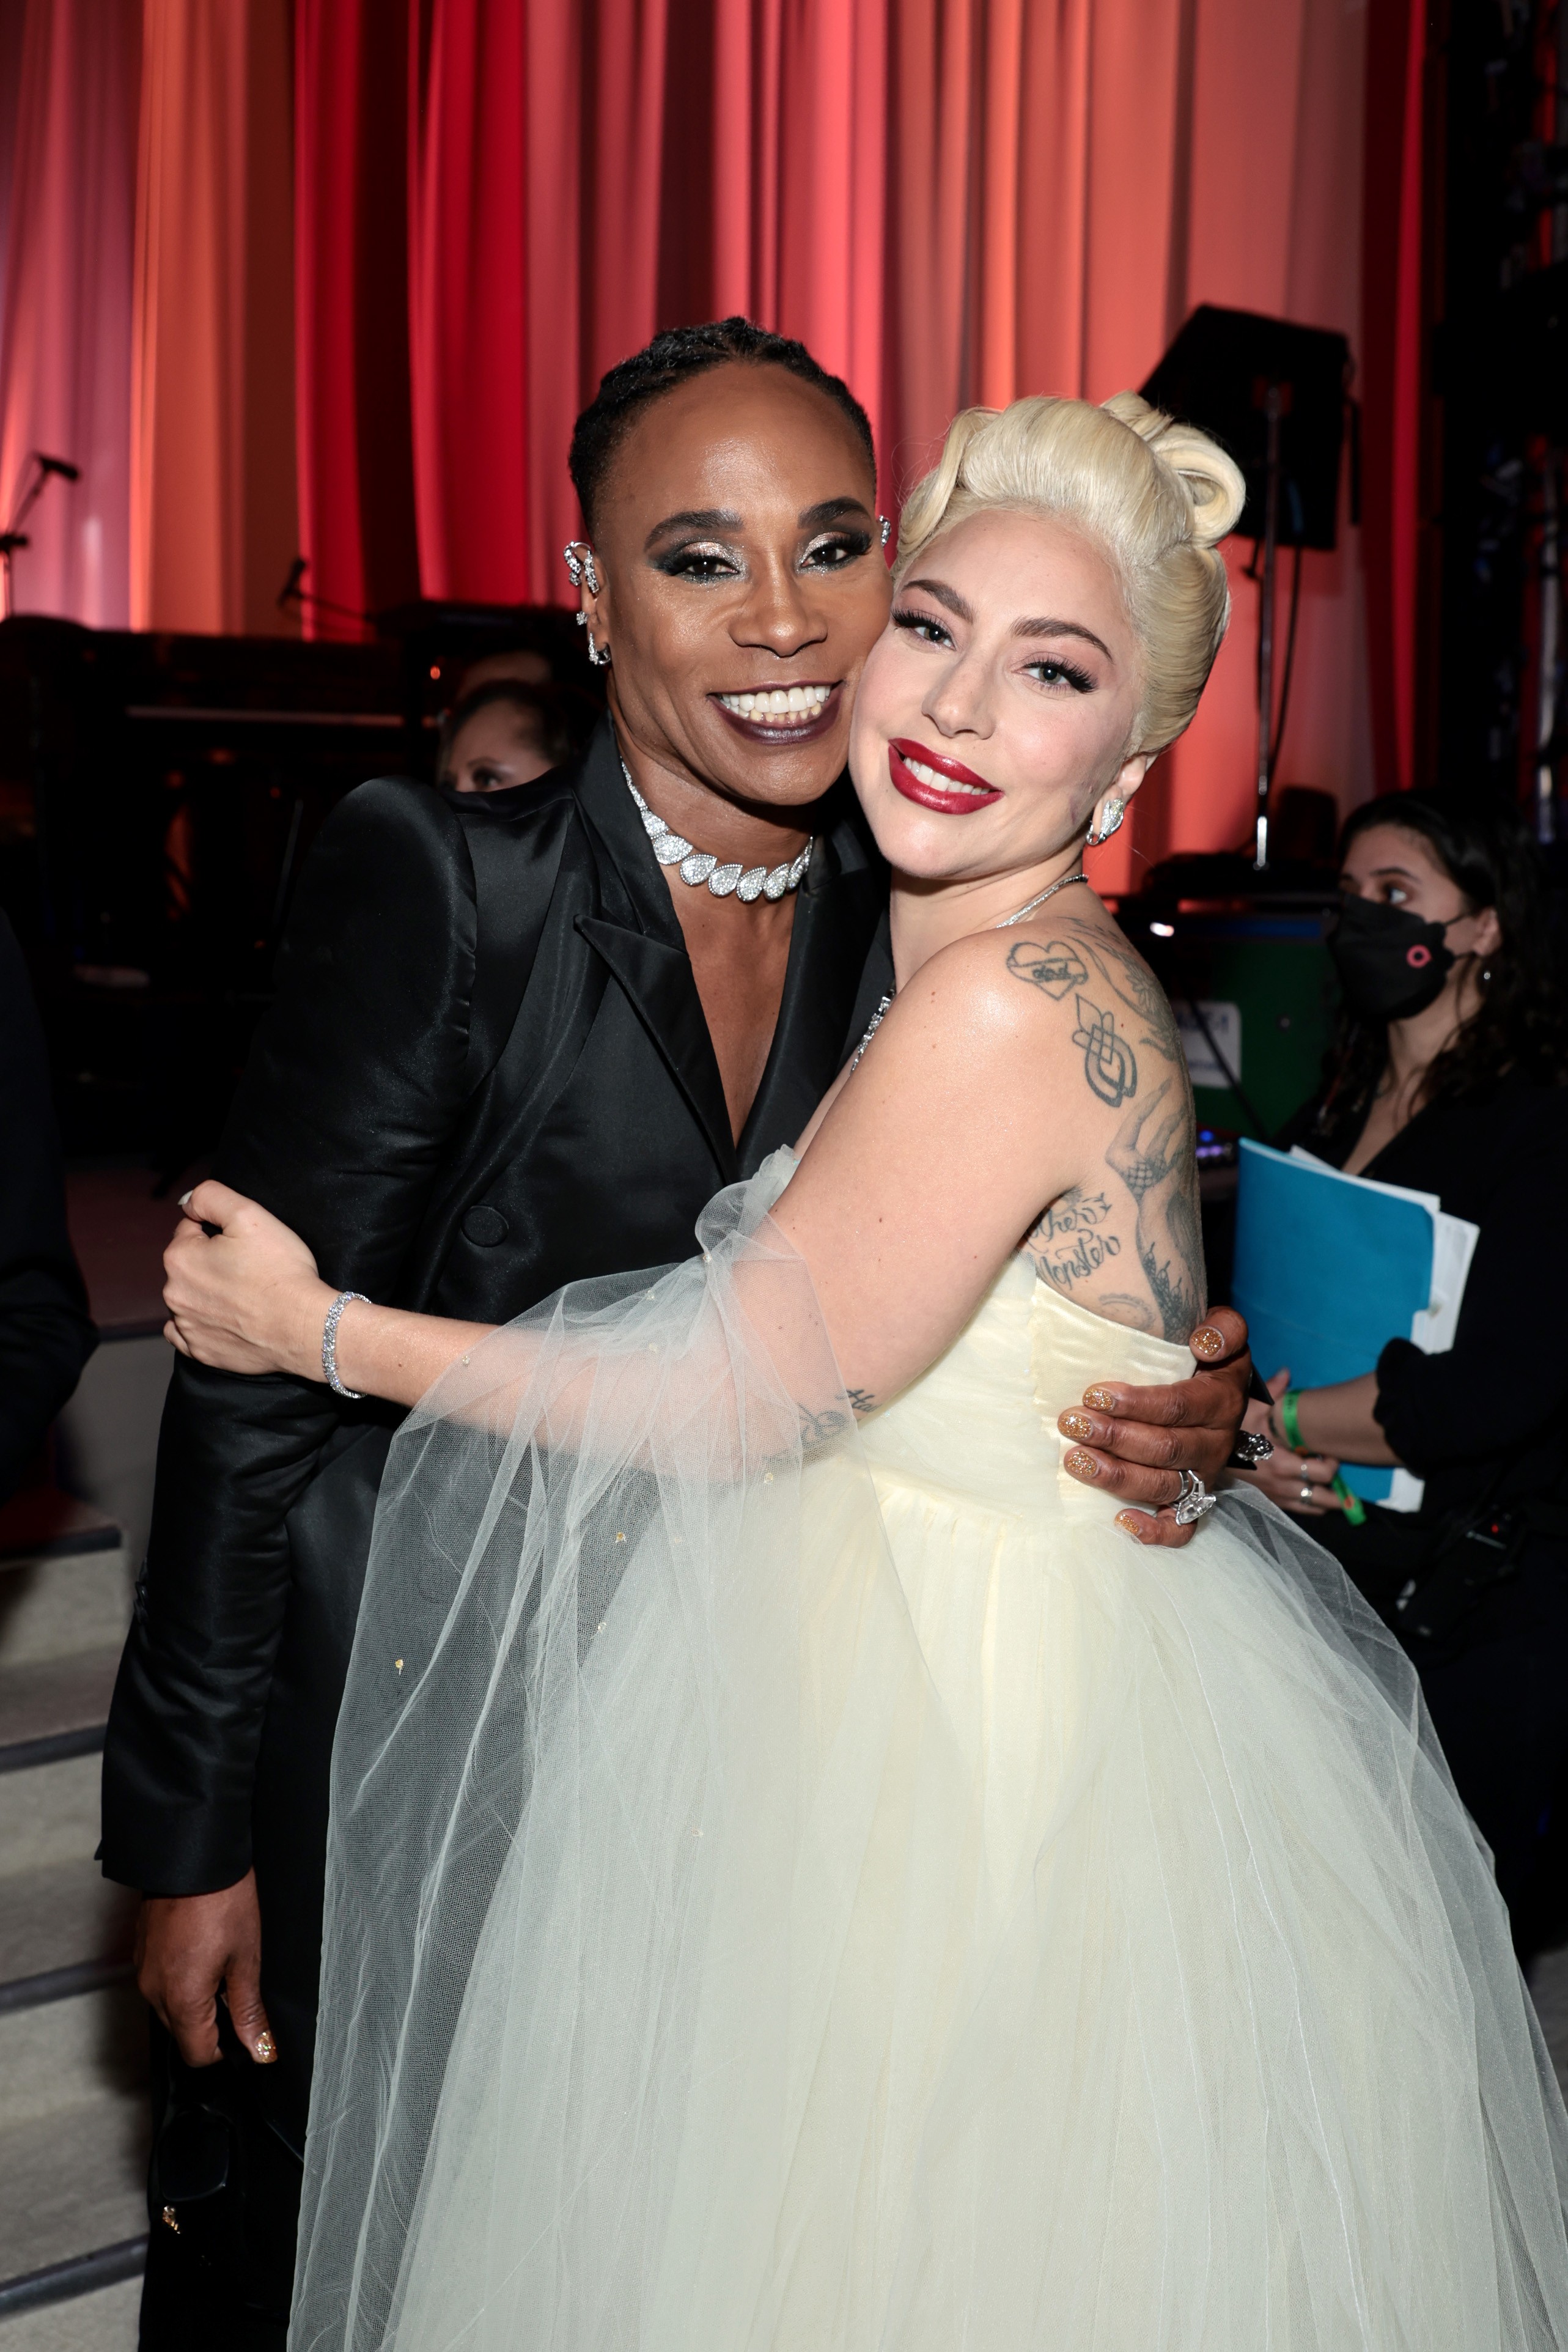 WEST HOLLYWOOD, CALIFORNIA - MARCH 27: (L-R) Billy Porter and Lady Gaga attend the Elton John AIDS Foundation's 30th Annual Academy Awards Viewing Party on March 27, 2022 in West Hollywood, California. (Photo by Jamie McCarthy/Getty Images for Elton John  (Foto: Getty Images for Elton John AIDS)